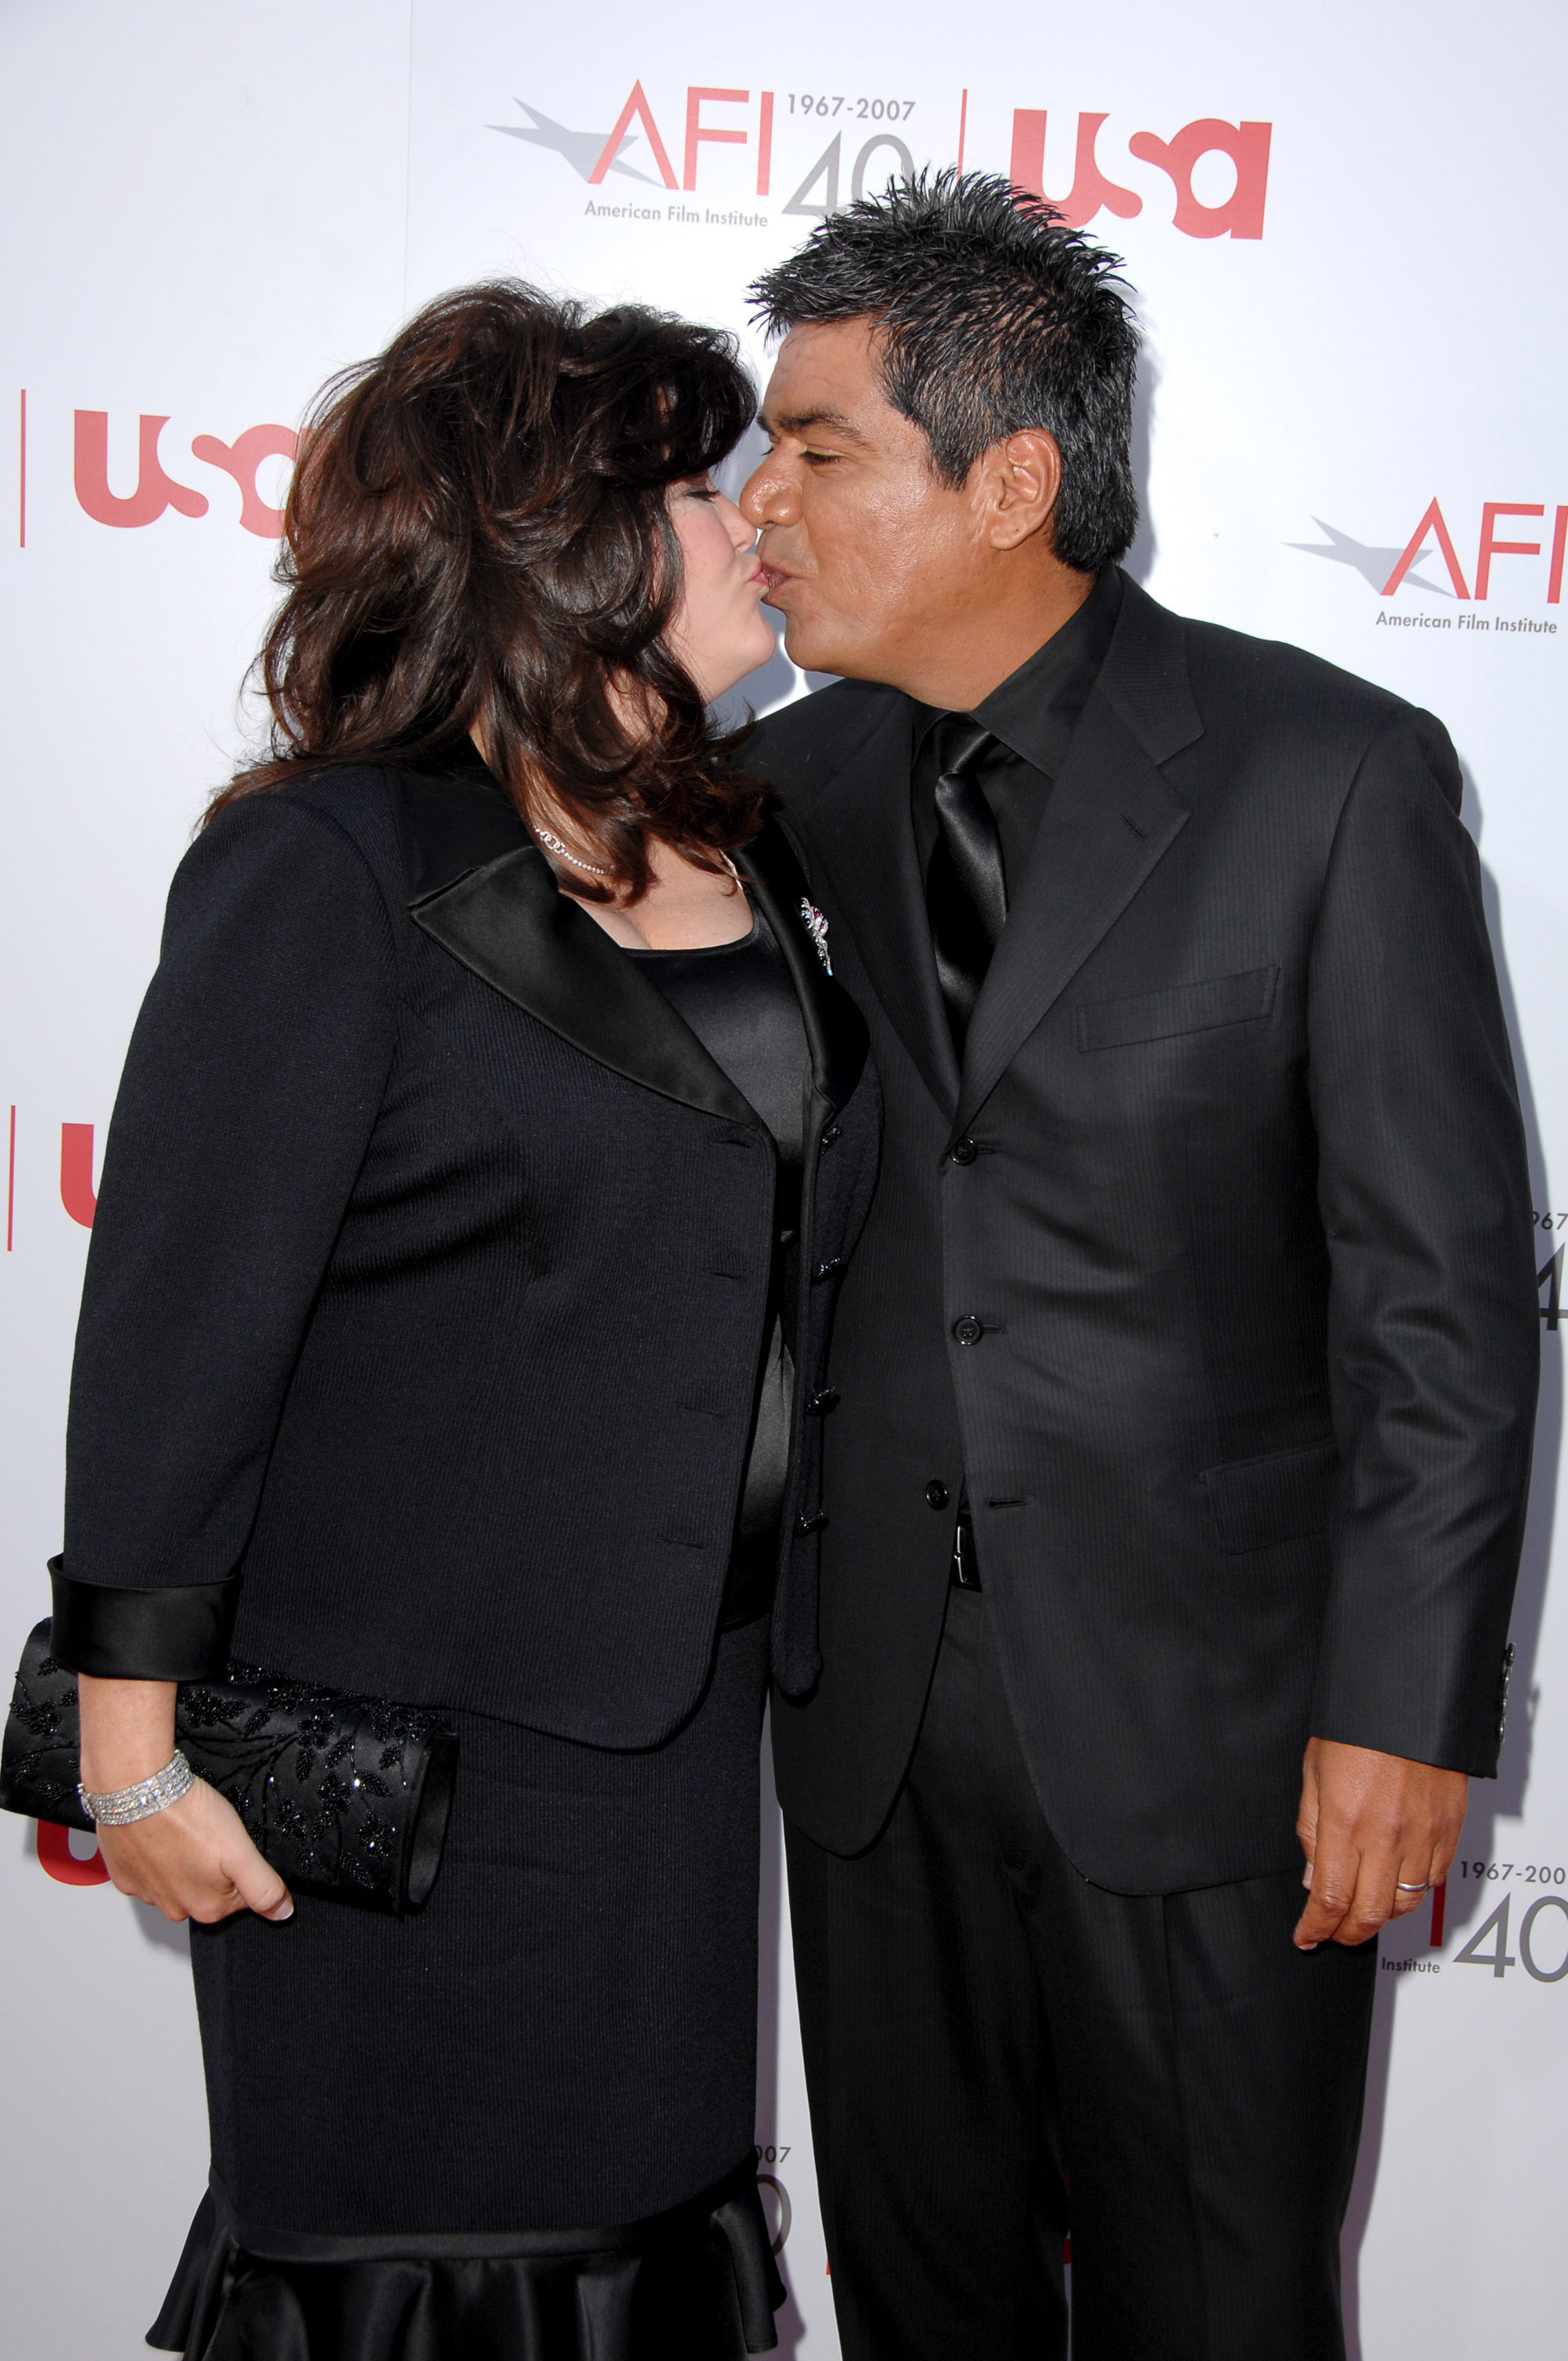 Ann Serrano and George Lopez at the 35th Annual AFI Life Achievement Award honoring Al Pacino at the Kodak Theater on June 7, 2007 in Hollywood, California. | Source: Getty Images